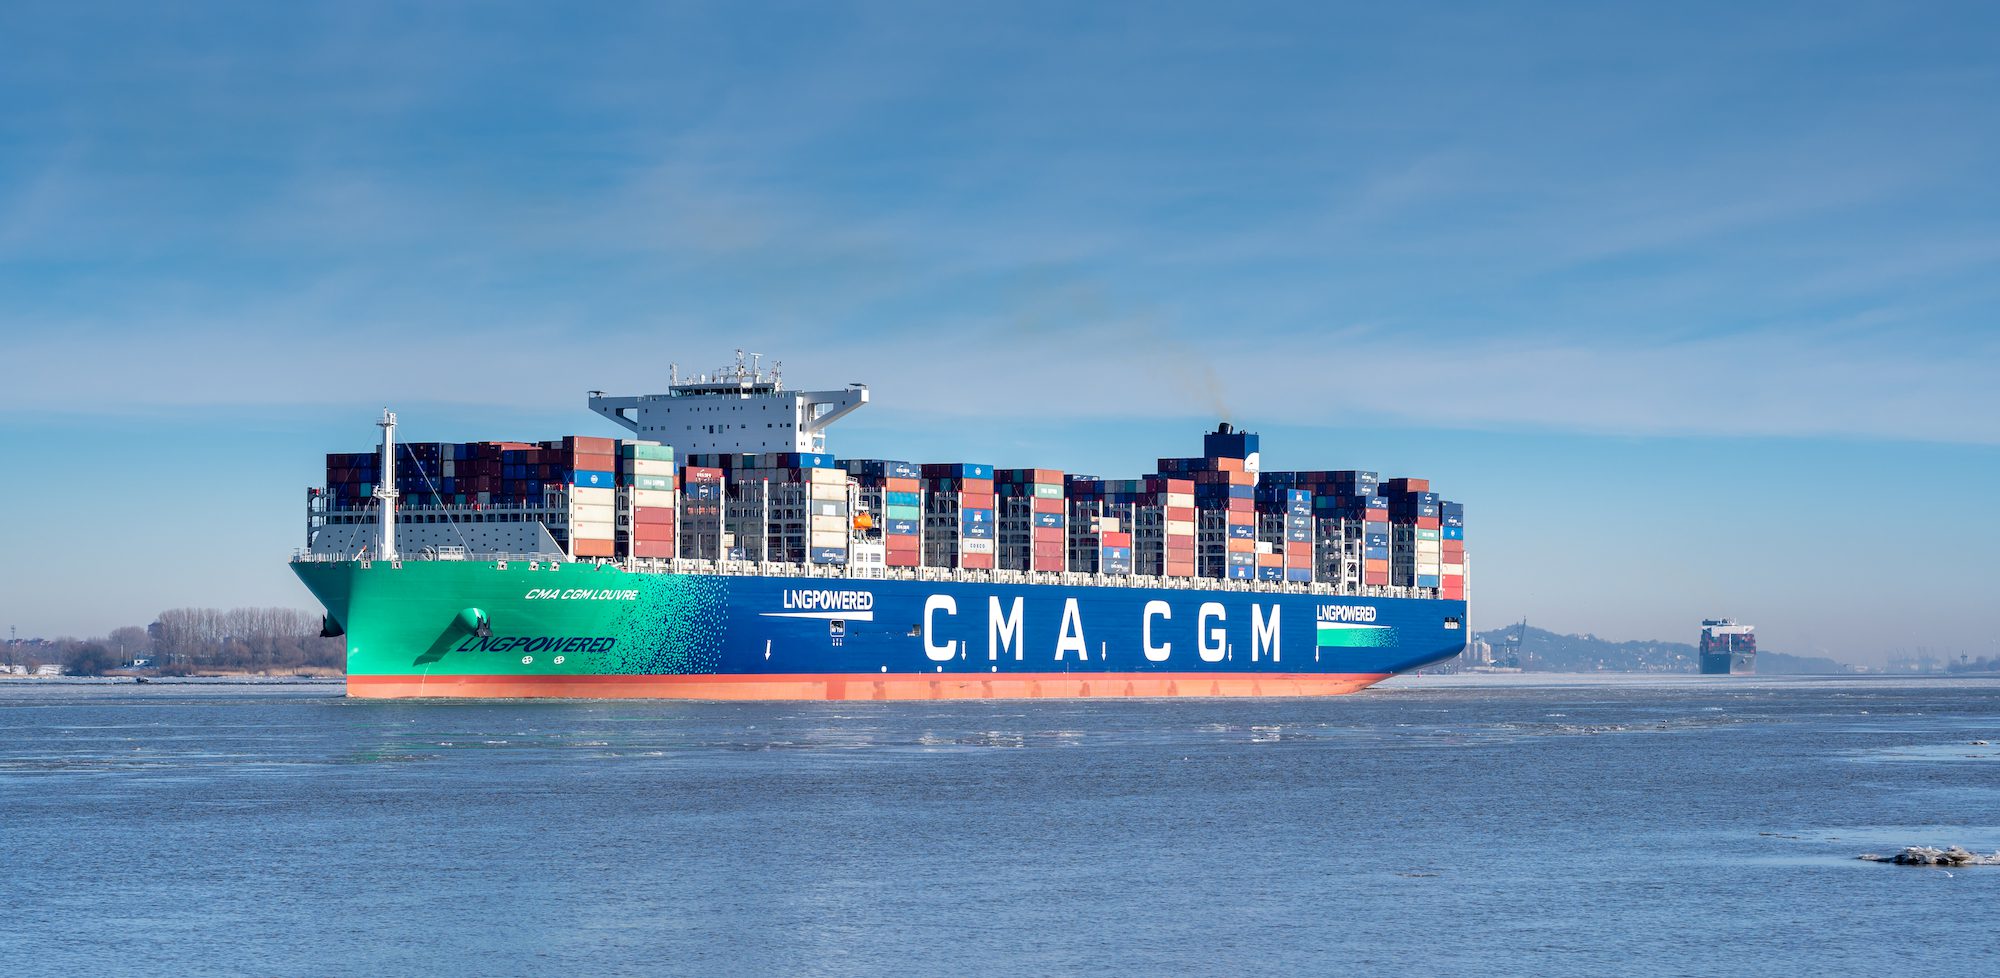 The LNG-powered containership, the CMA CGM, on the river Elbe near the city of Hamburg, Germany, February 14, 2021. Photo: FrankHH / Shutterstock.com